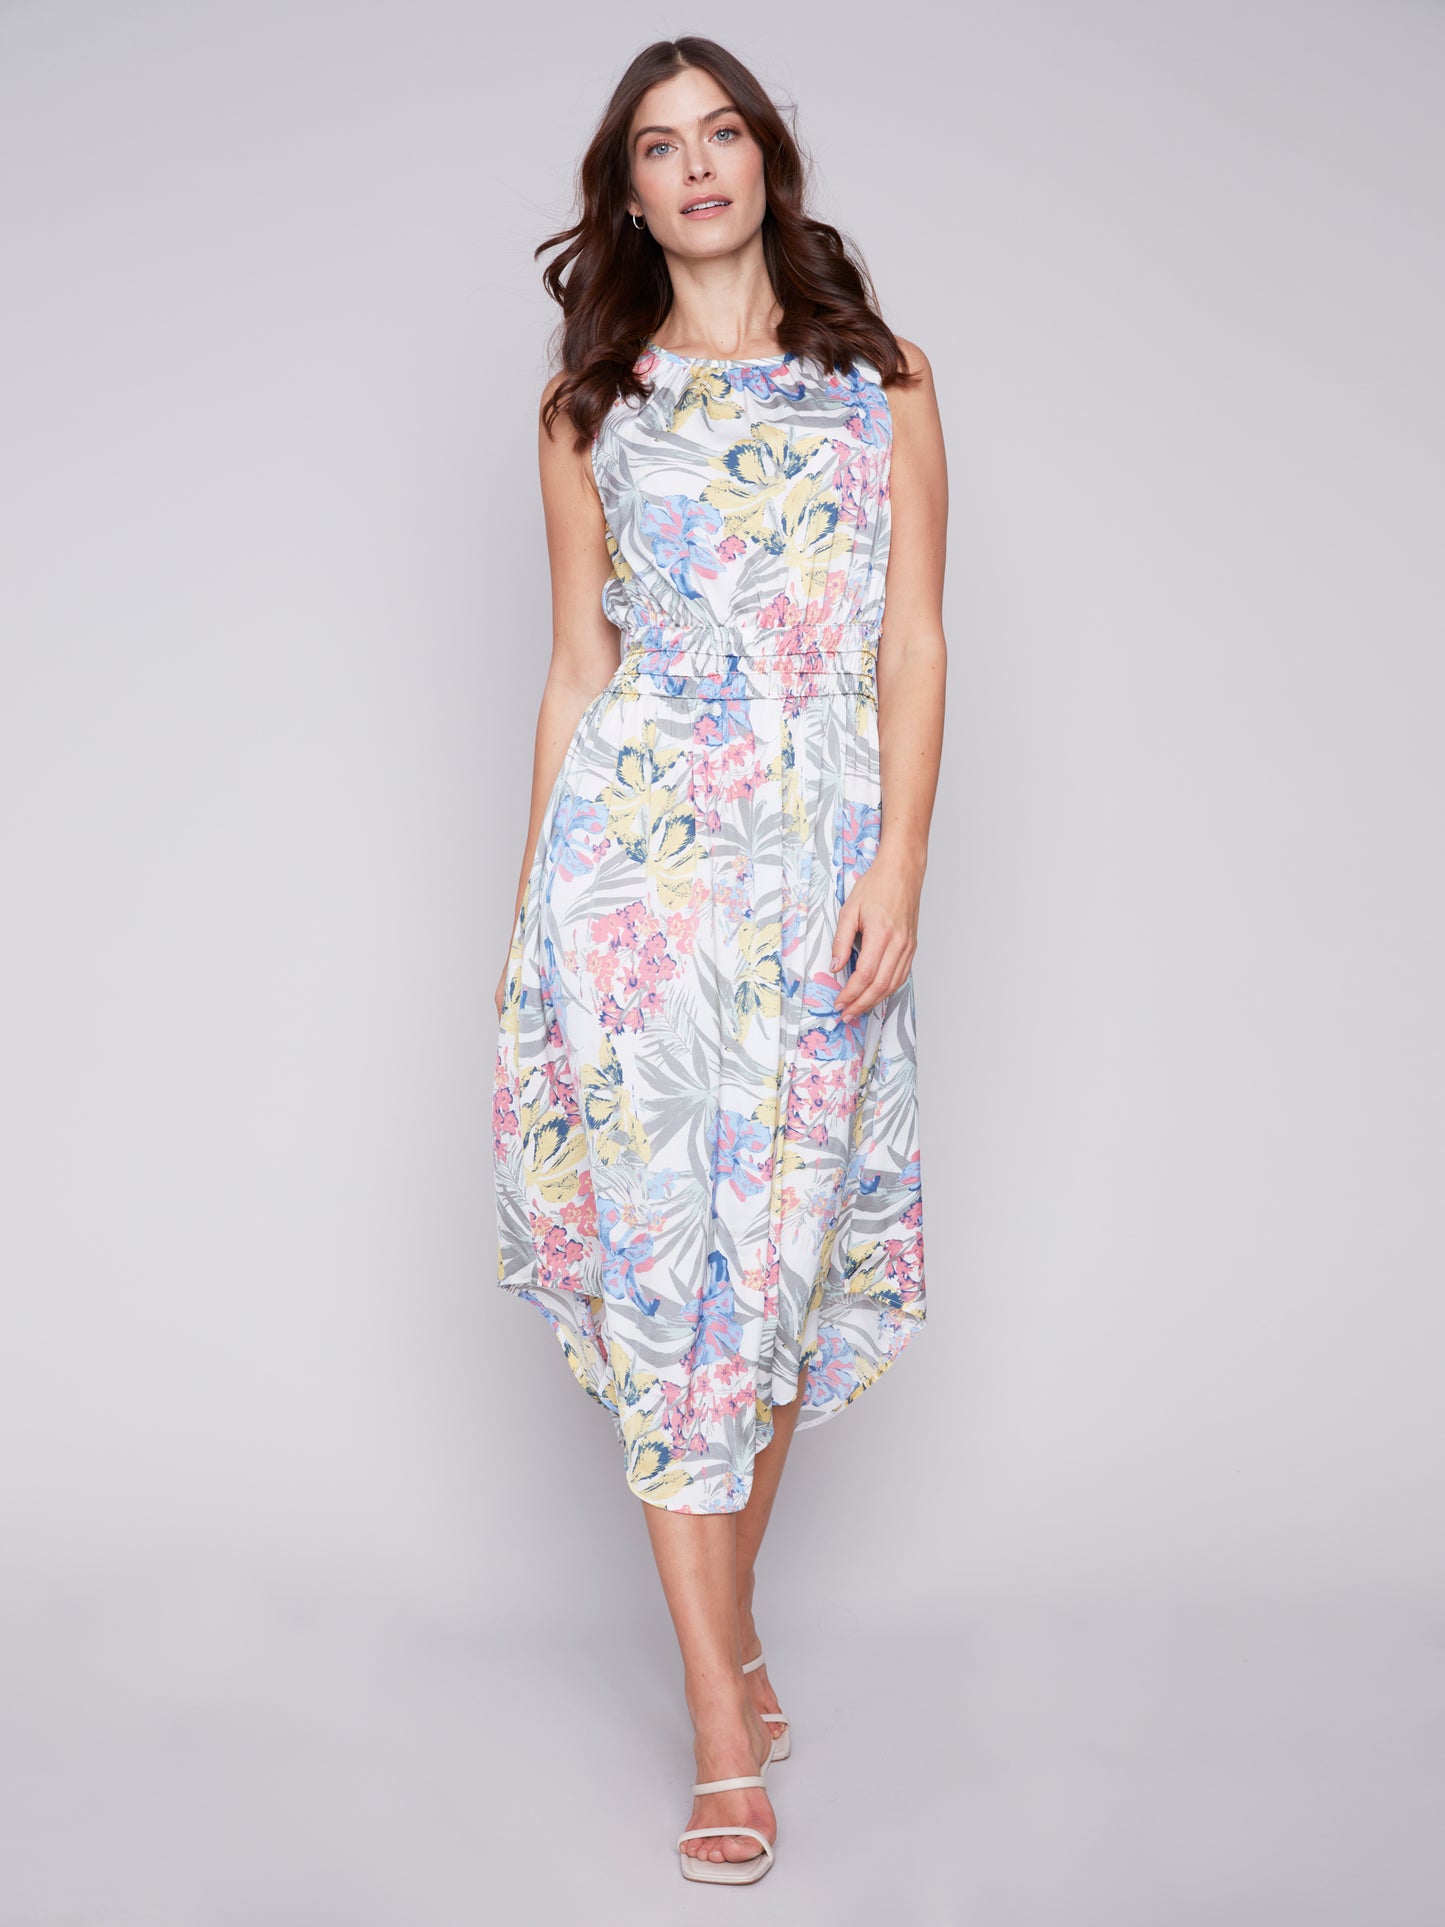 A woman in a Charlie B Petal Path Sleeveless Dress with Elastic Smocking Waist posing against a neutral background.